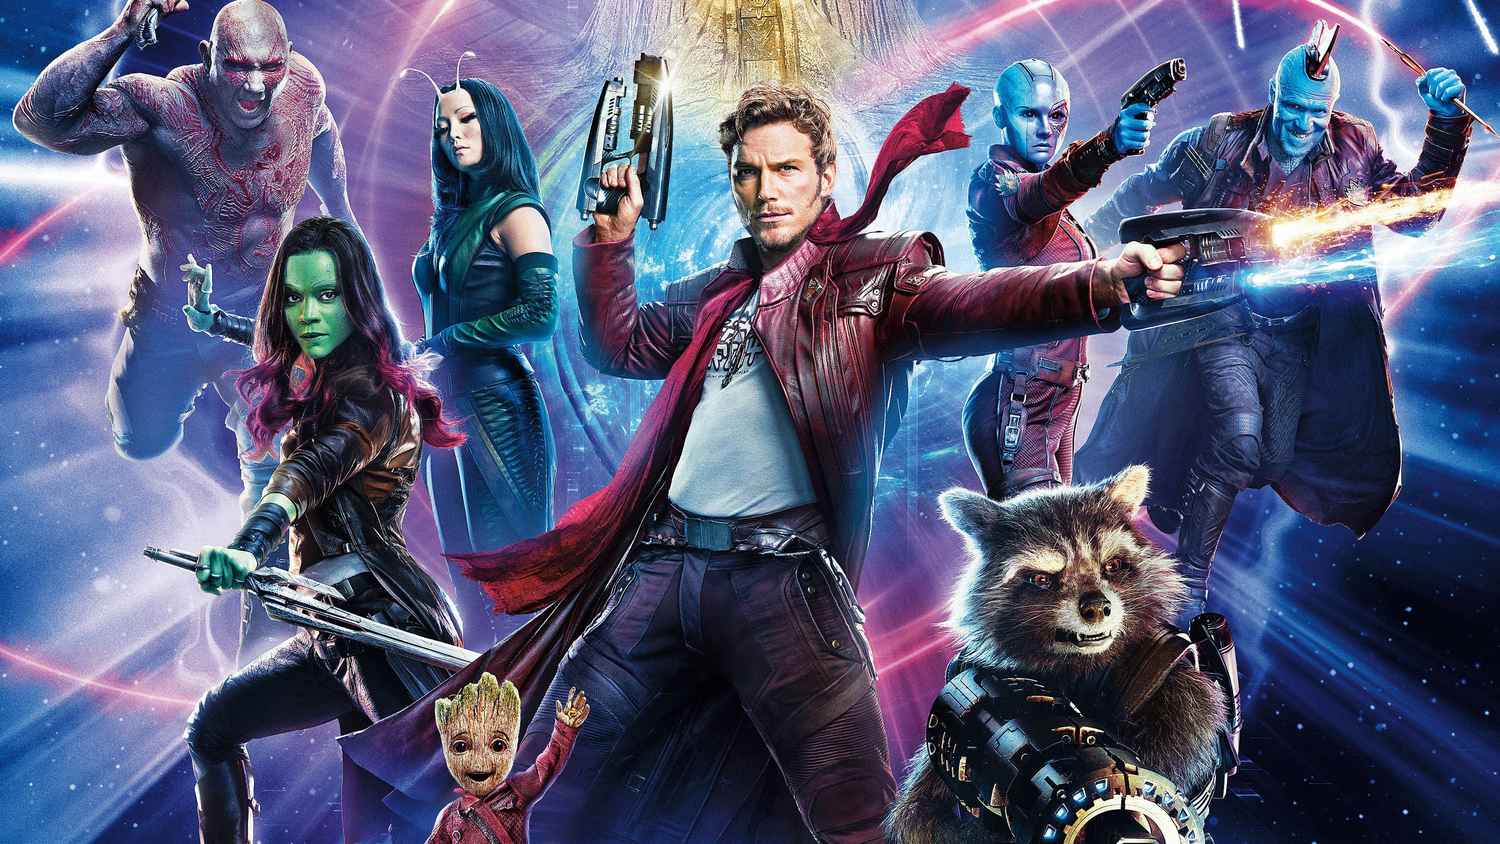 guardians of the galaxy 2 free online megavideo